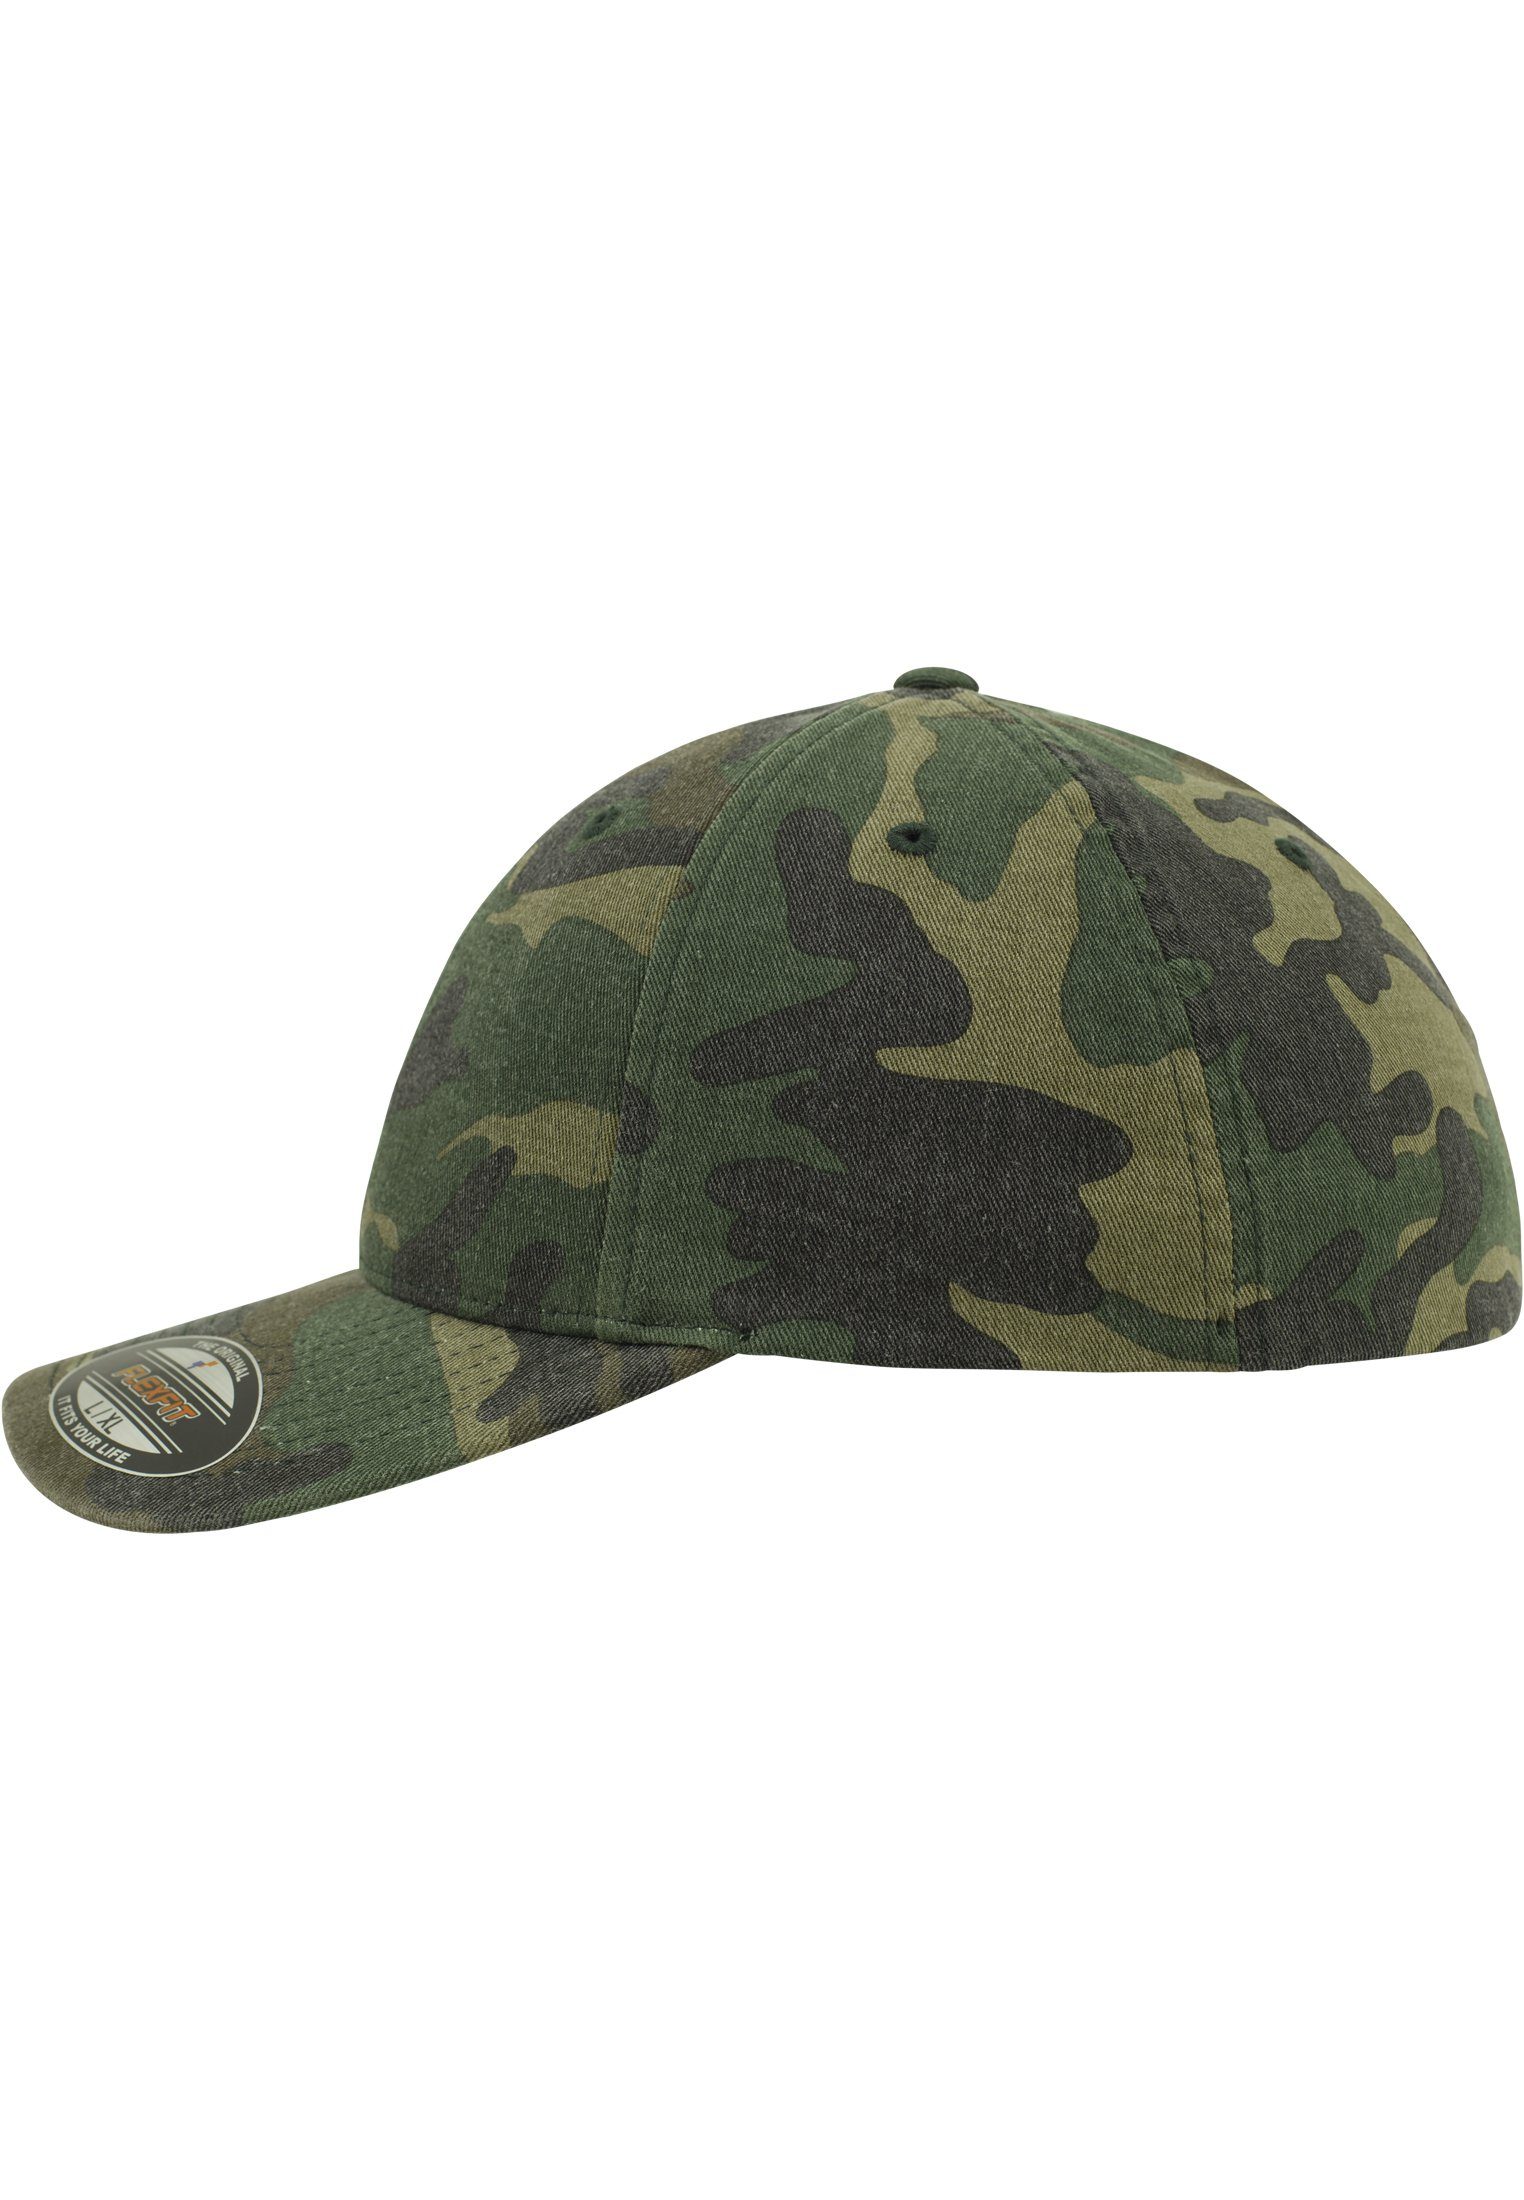 Flex green Washed Washed Garment Accessoires Garment Camo 6977CA camo Flexfit Cap Flexfit Camo